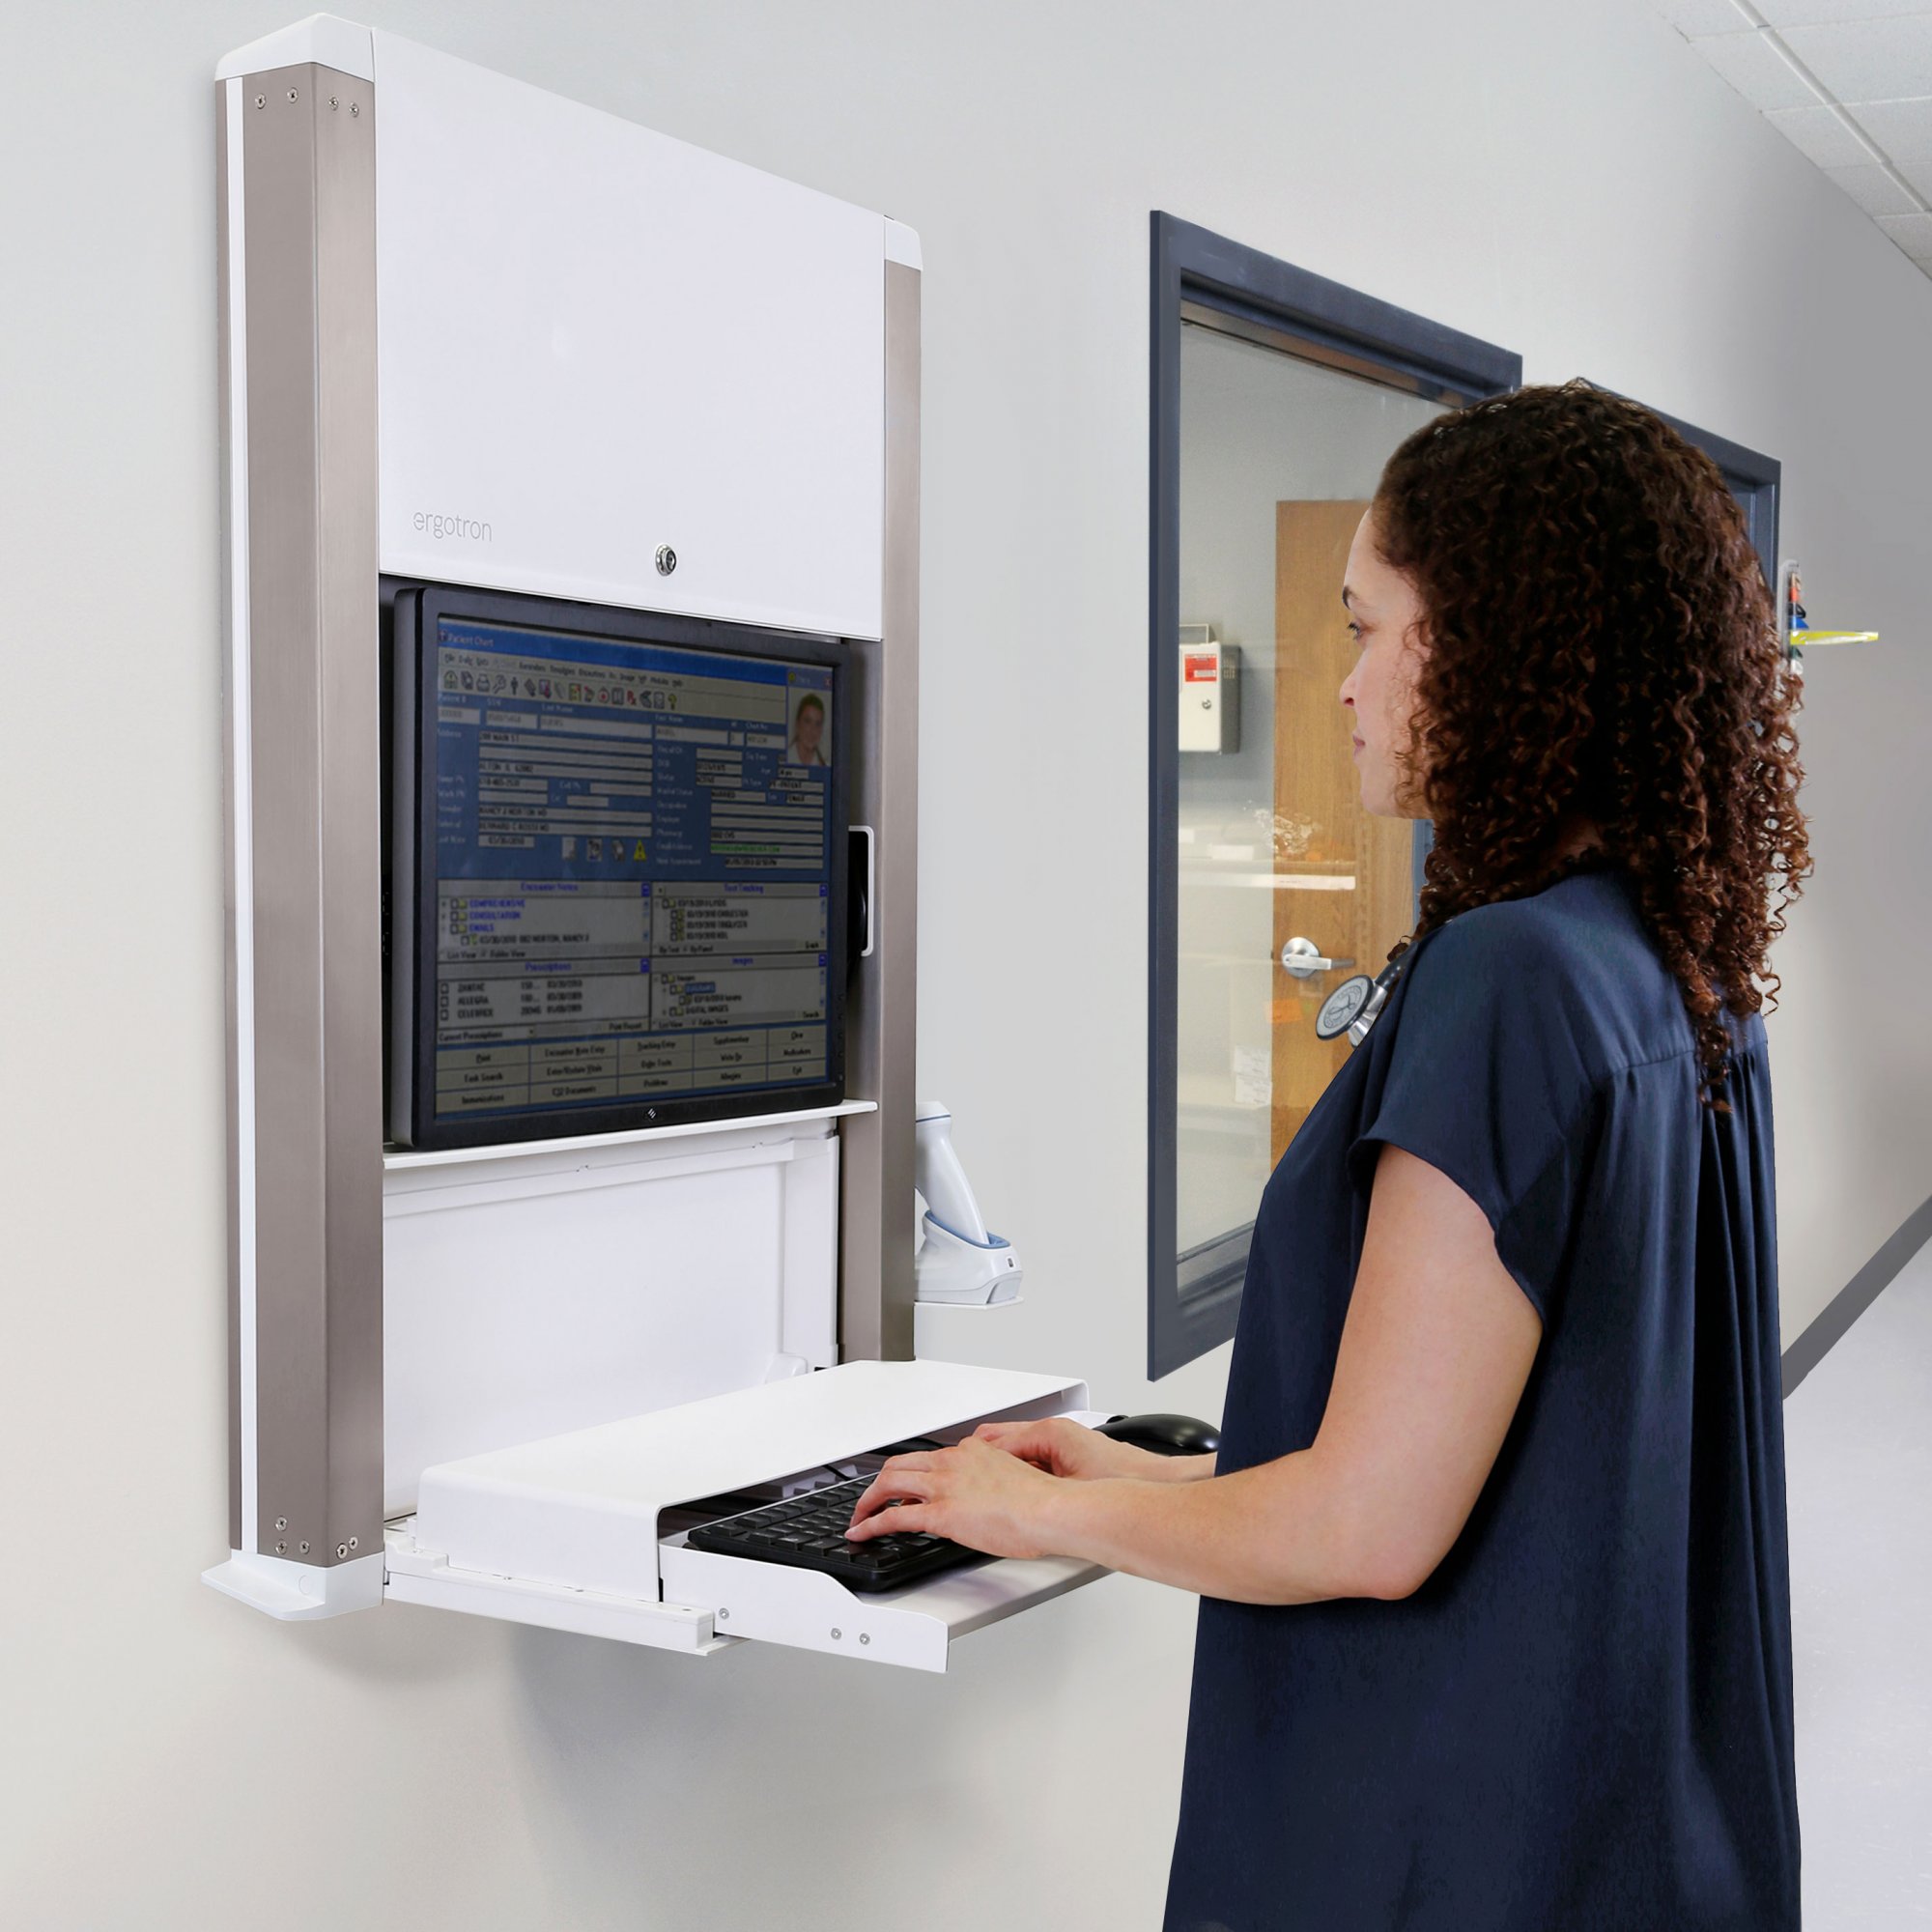 Caregivers can work comfortably while saving space in crowded patient rooms or hallways with 61-367-030 low-profile, wall-mount workstation